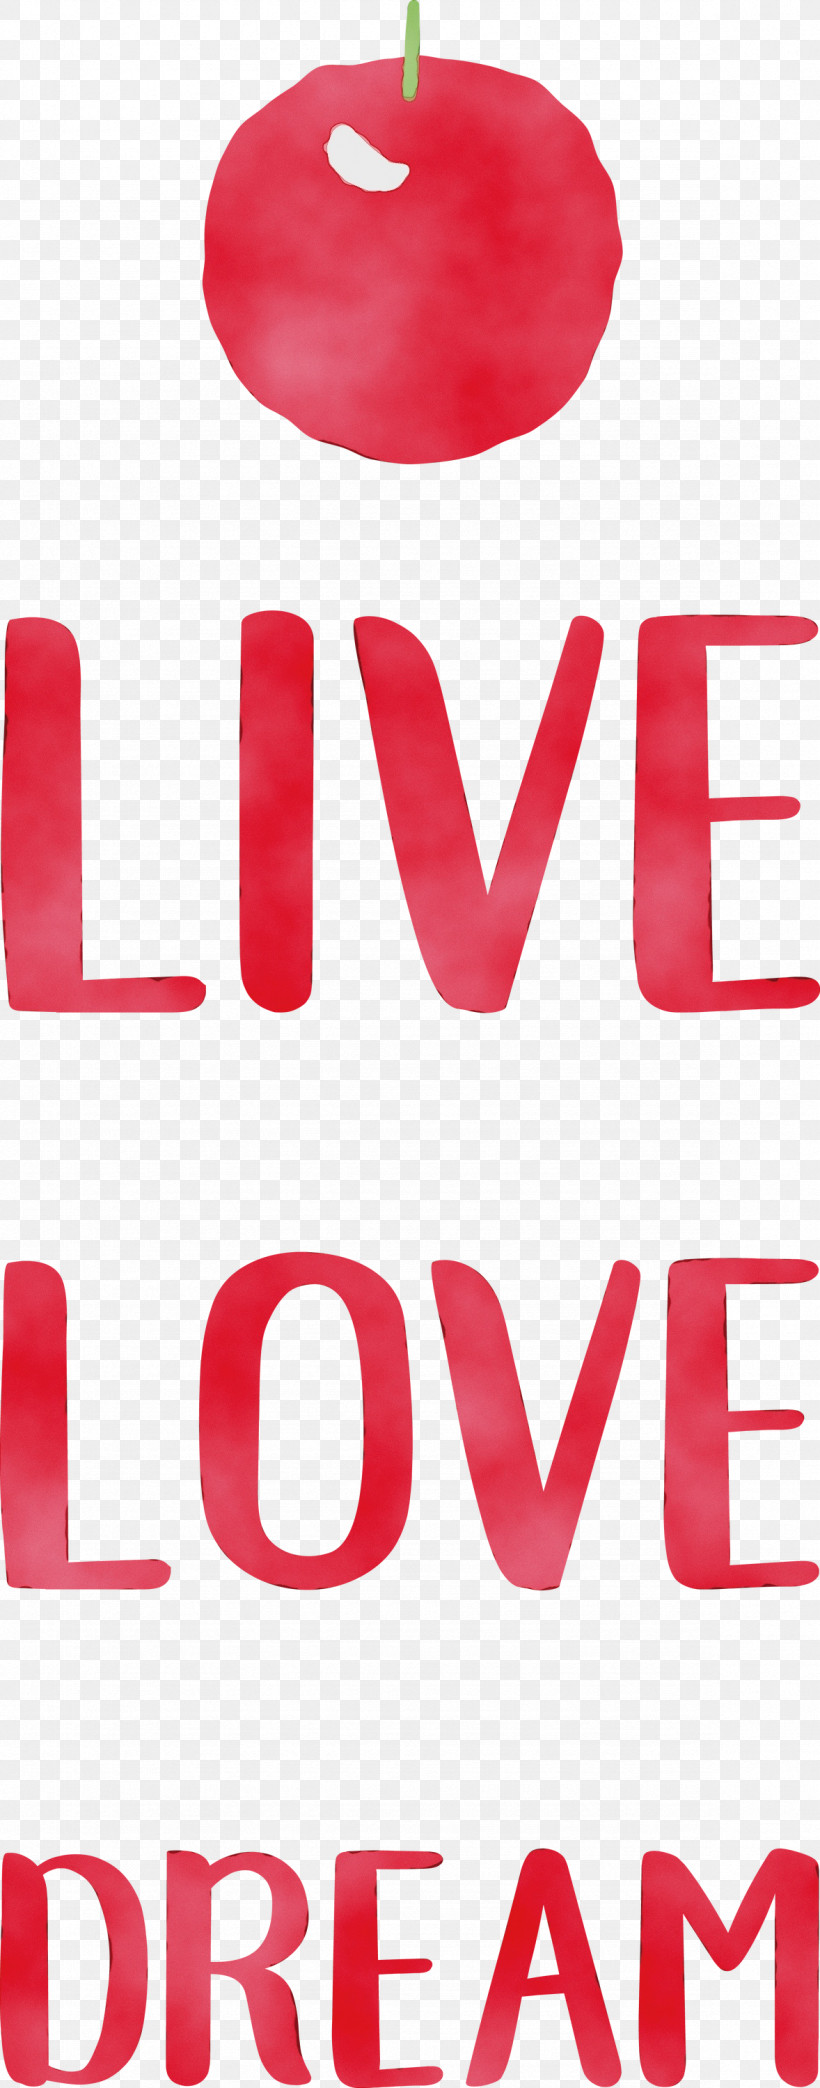 Font Meter, PNG, 1178x3000px, Live, Dream, Love, Meter, Paint Download Free